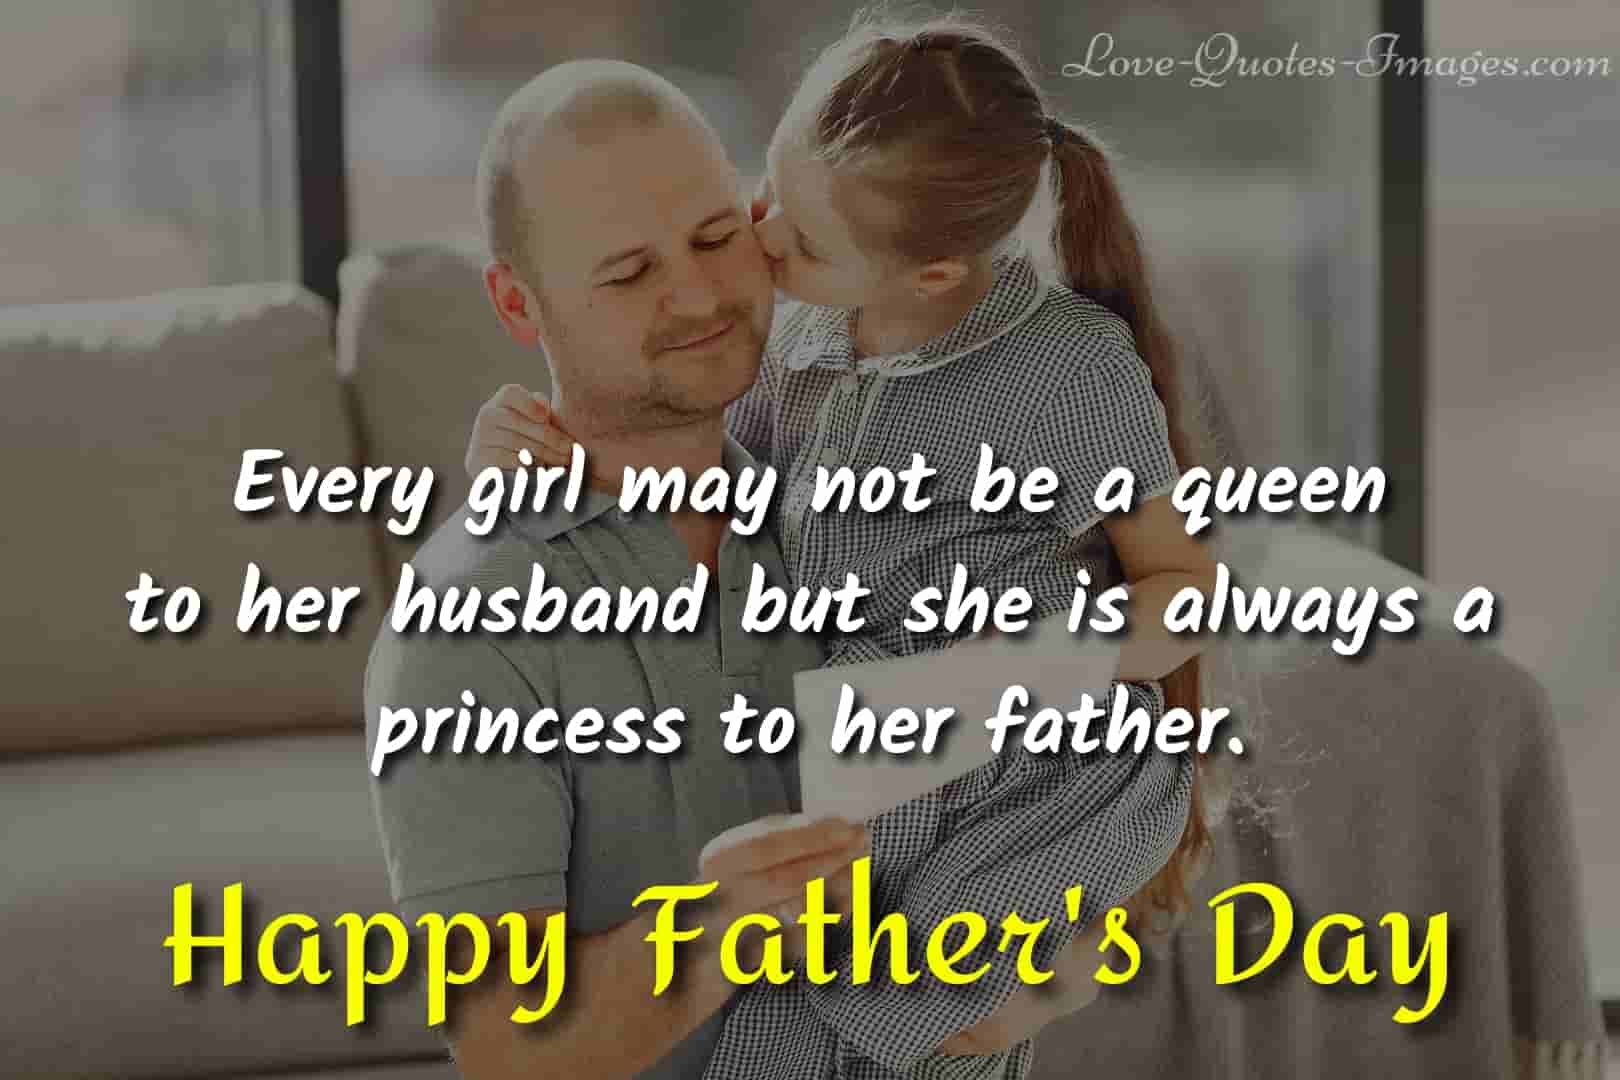 Happy Fathers Day Quotes images